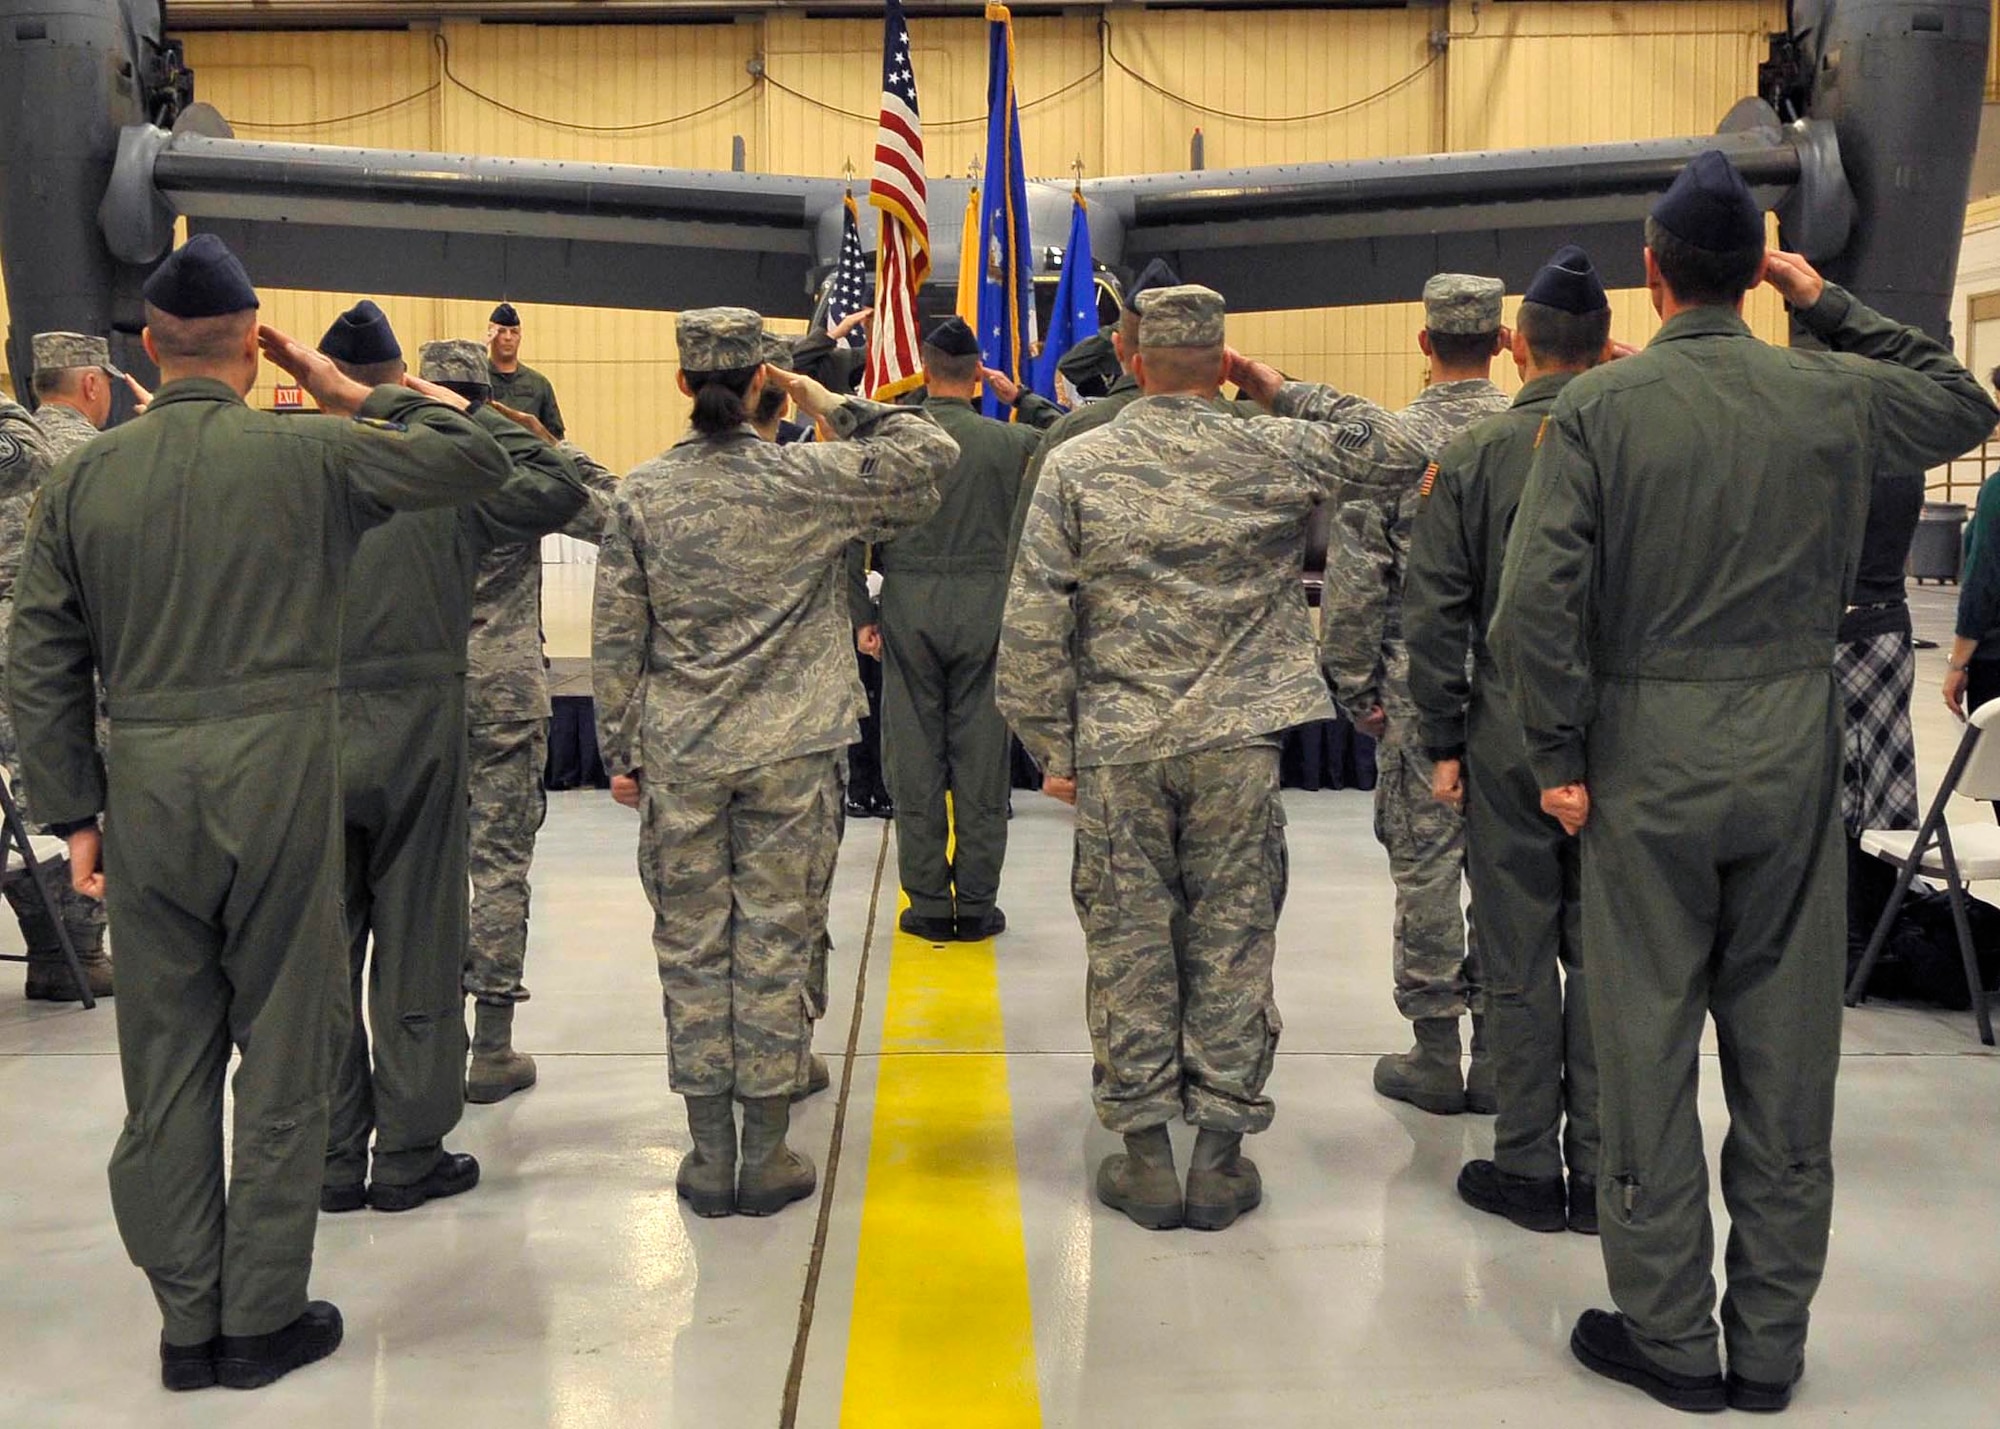 CANNON AIR FORCE BASE, N.M. -- Members of the 20th Special Operations Squadron salute the flag during the playing of the National Anthem during the squadron's reactivation ceremony Dec. 15. The unit will operate the CV-22 Osprey aircraft in support of special operations missions as the 27th Special Operation Wing's newest squadron.  (U.S. Air Force photo by Staff Sgt. Heather R. Redman)